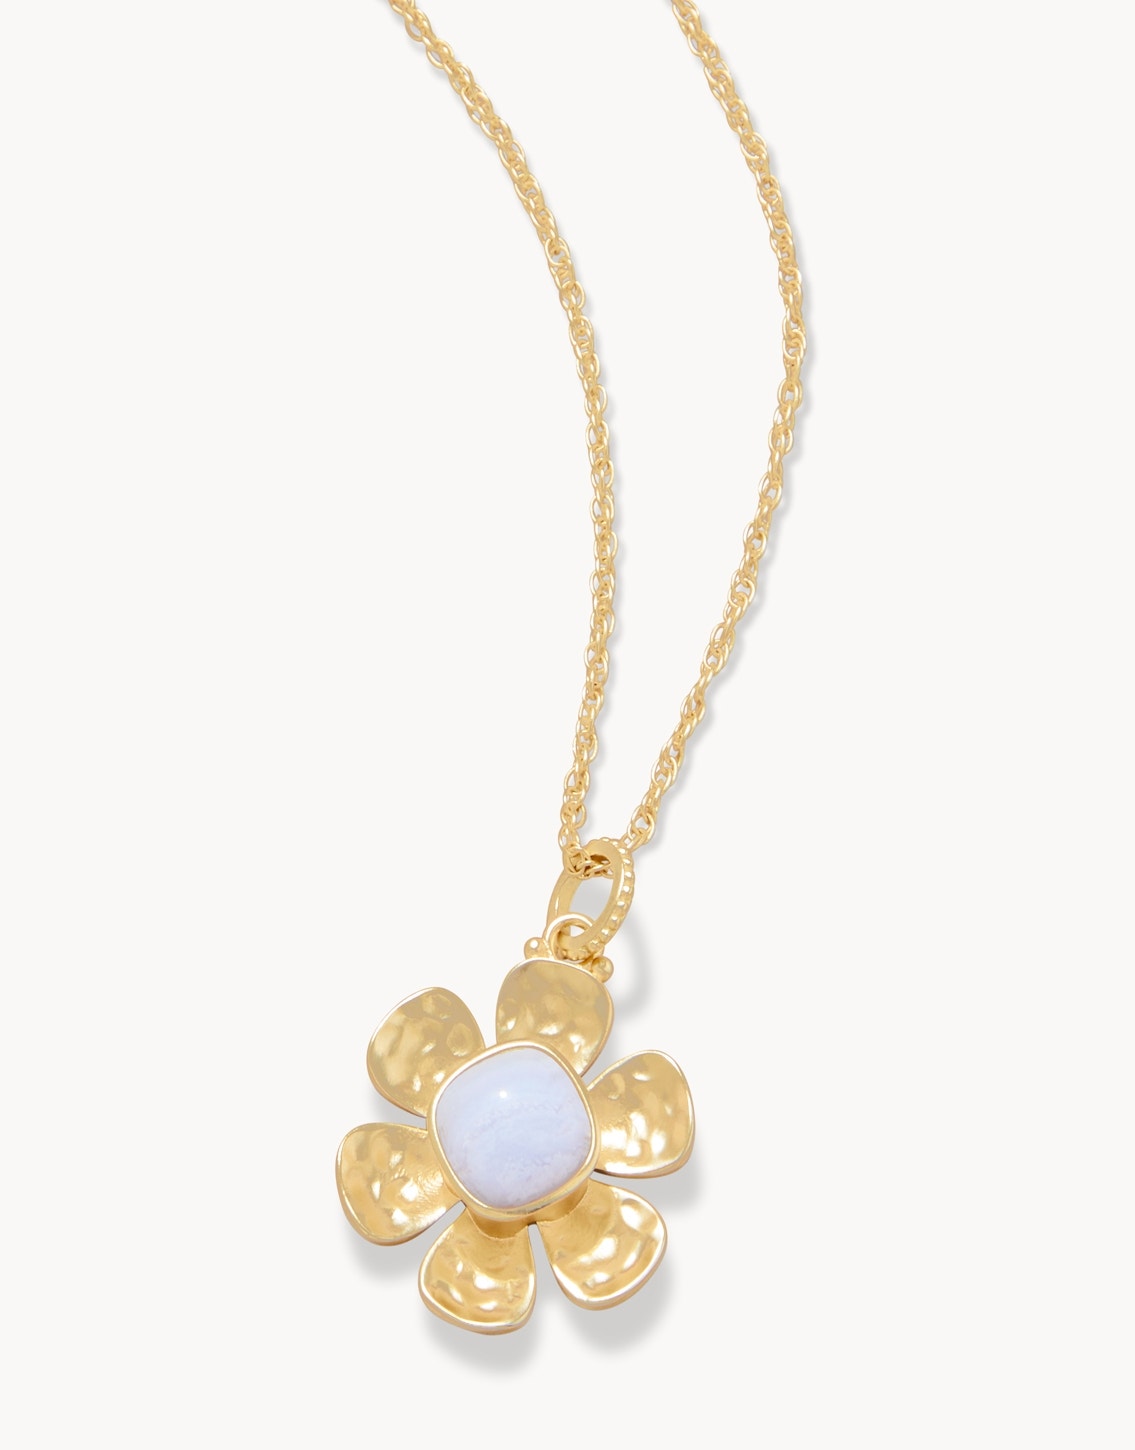 Blue Chalcedony Primrose Necklace by Spartina